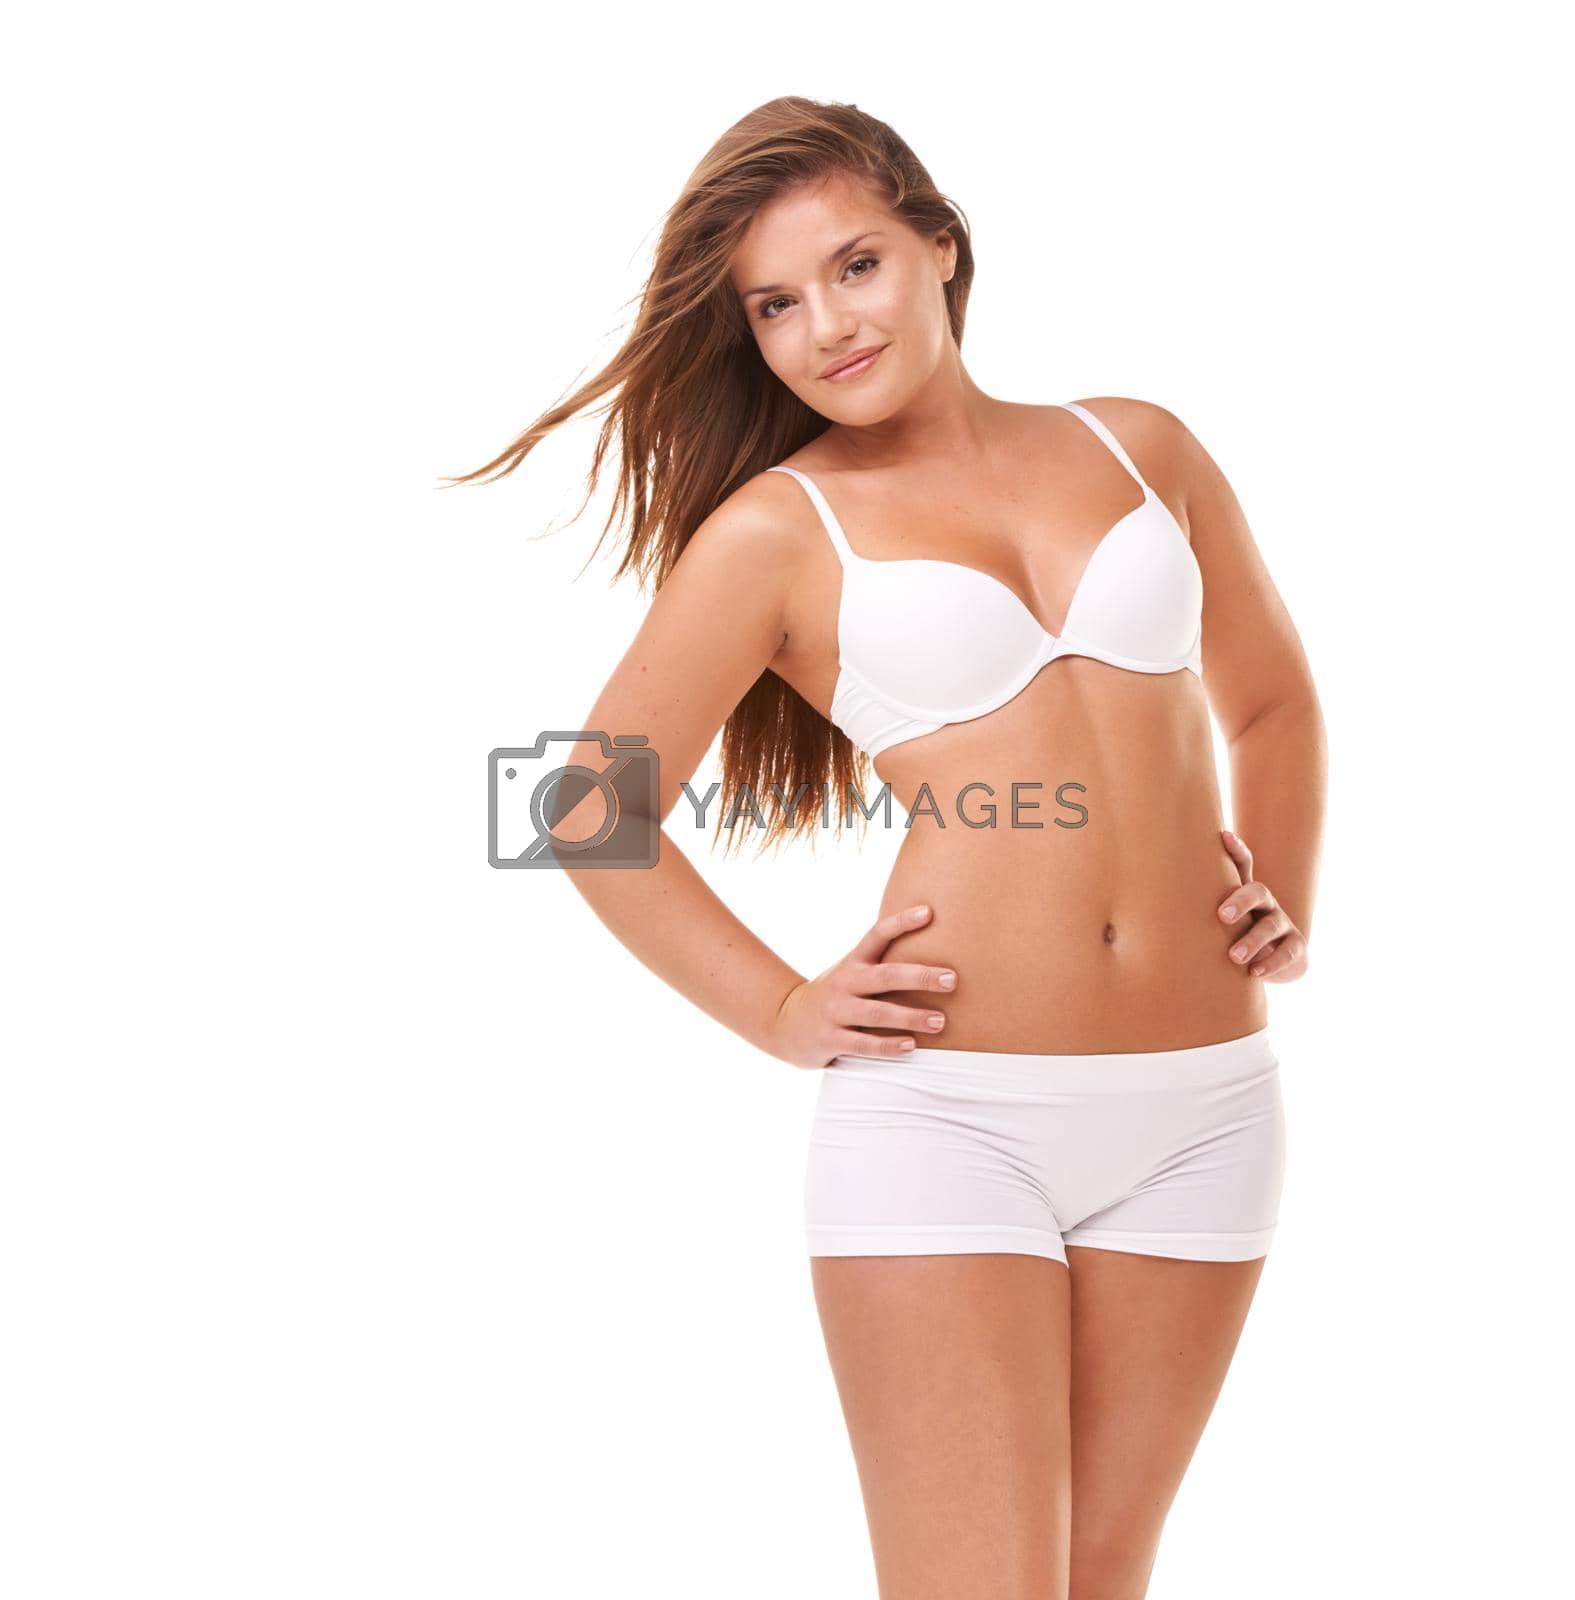 Royalty free image of Her confidence is all natural. Full-length portrait of a confident young woman posing in her underwear. by YuriArcurs